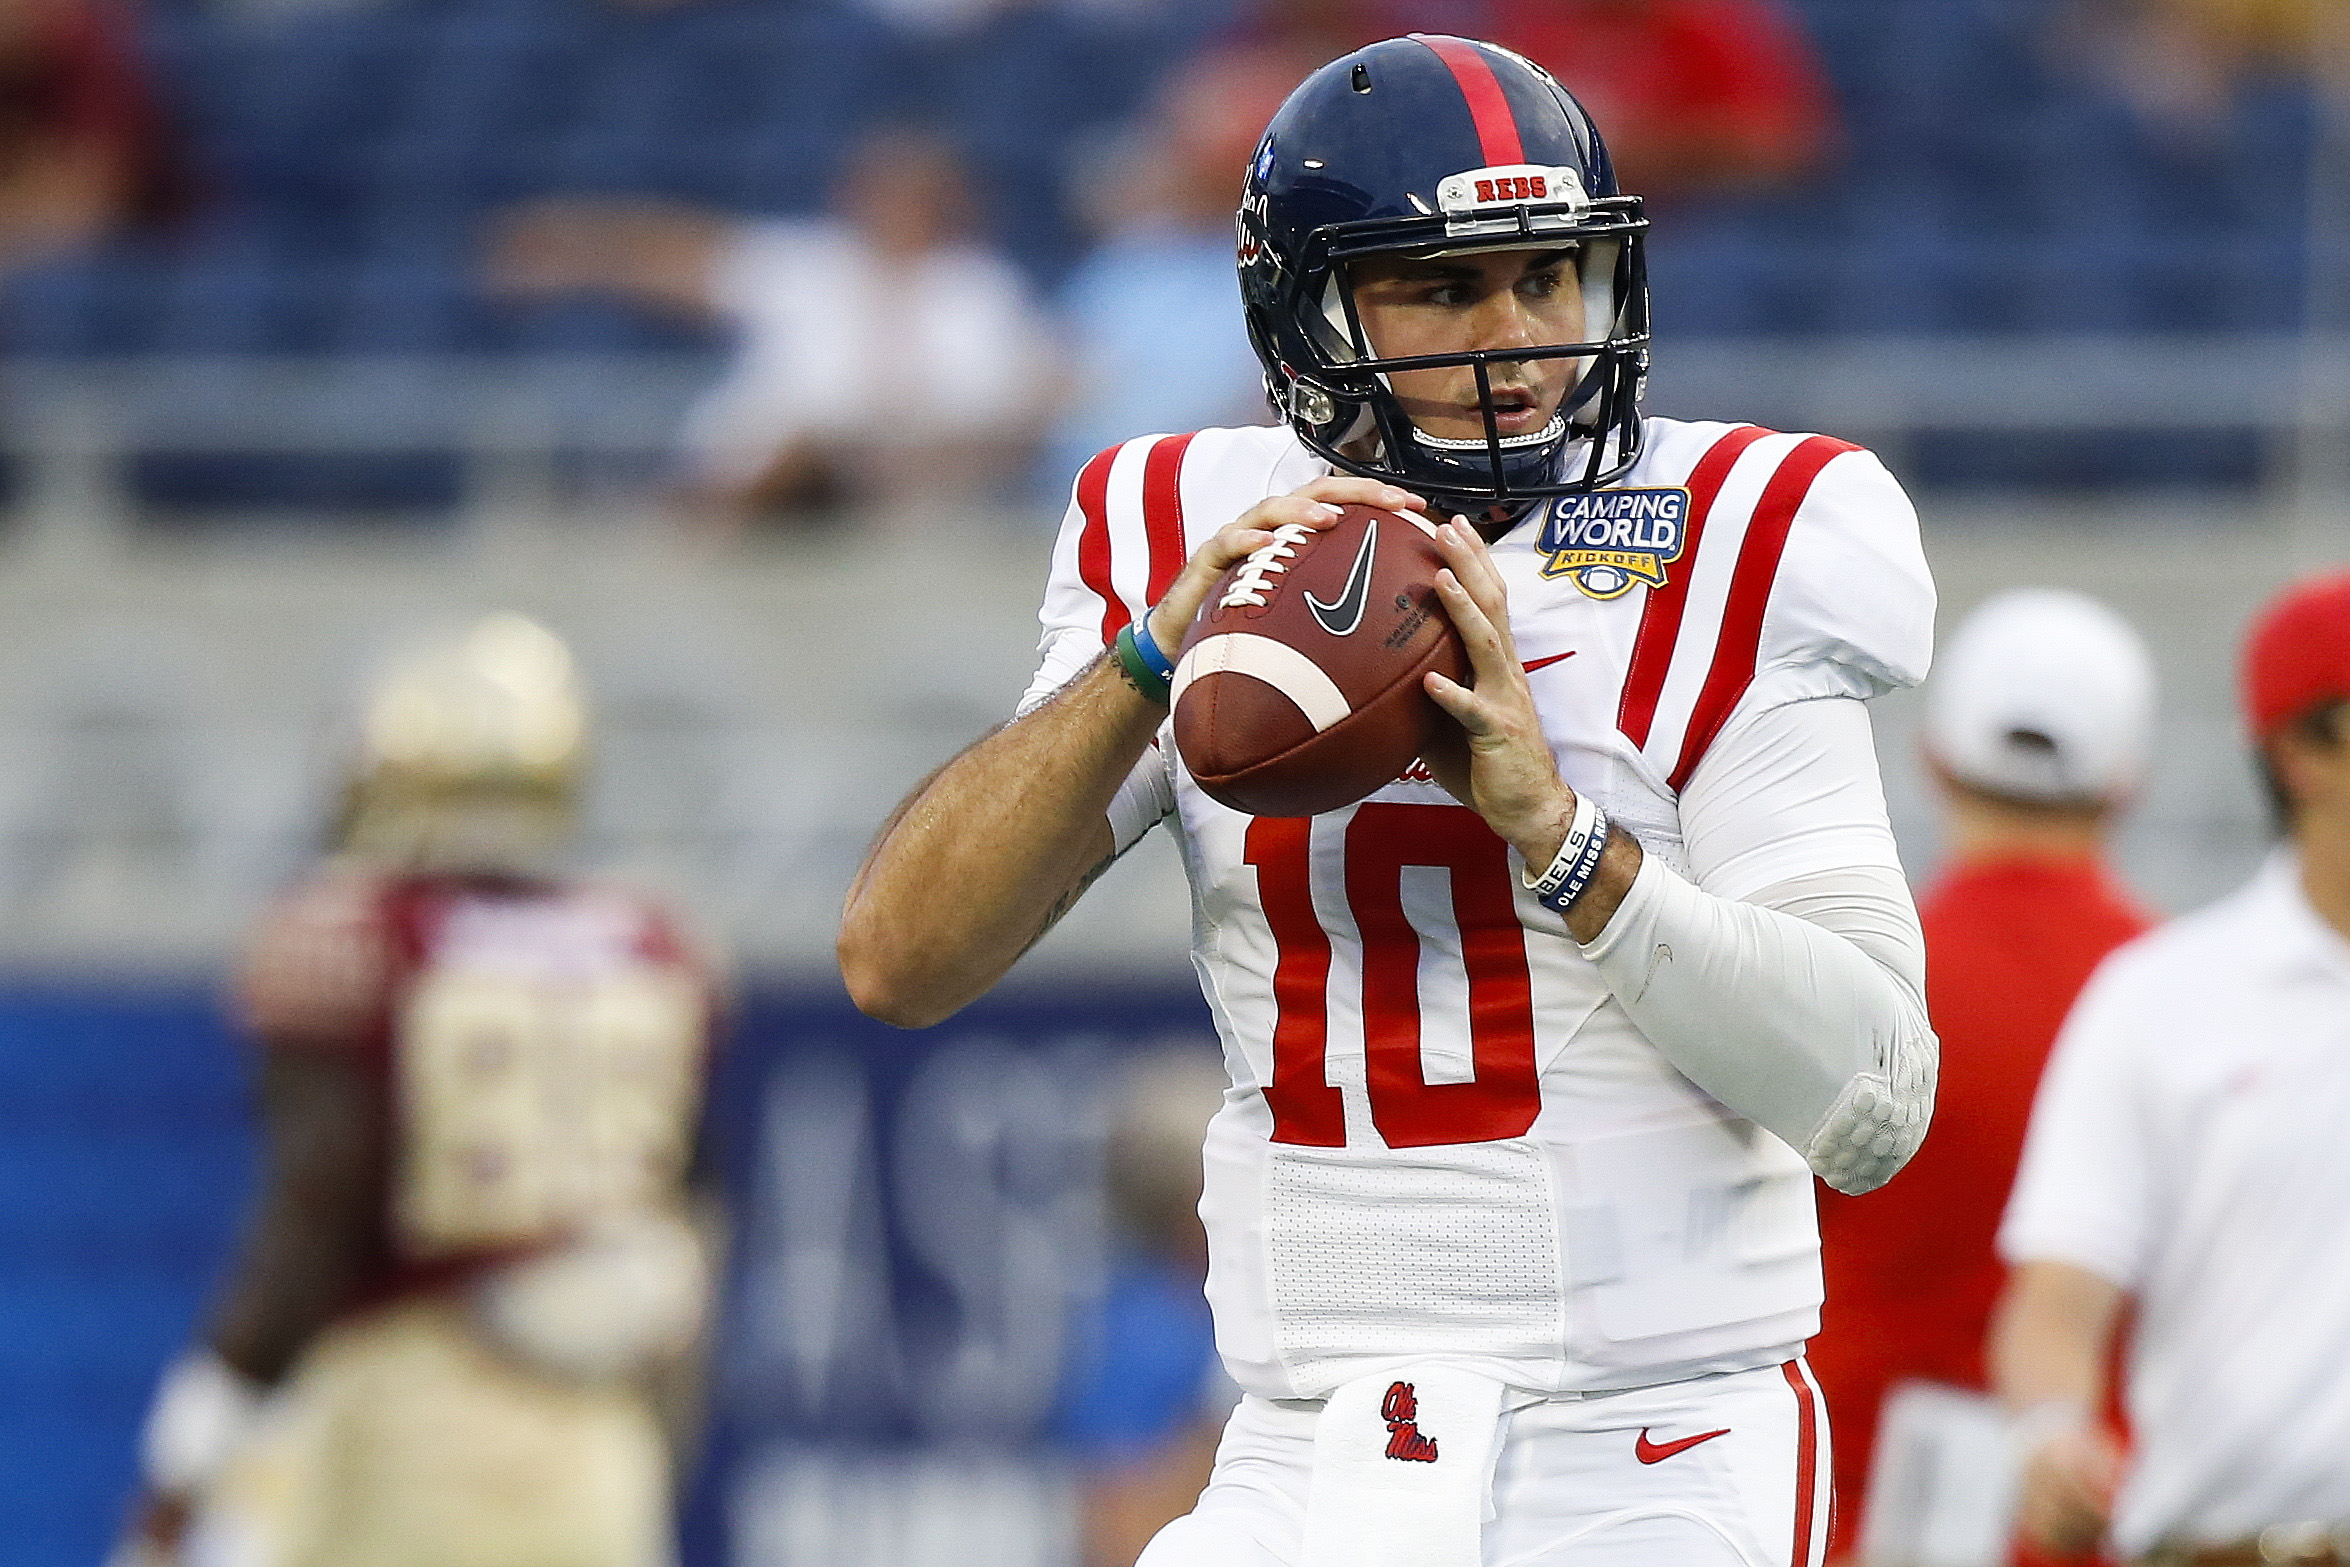 Mia Khalifa Shames Another One, This Time Ole Miss QB Chad Kelly 